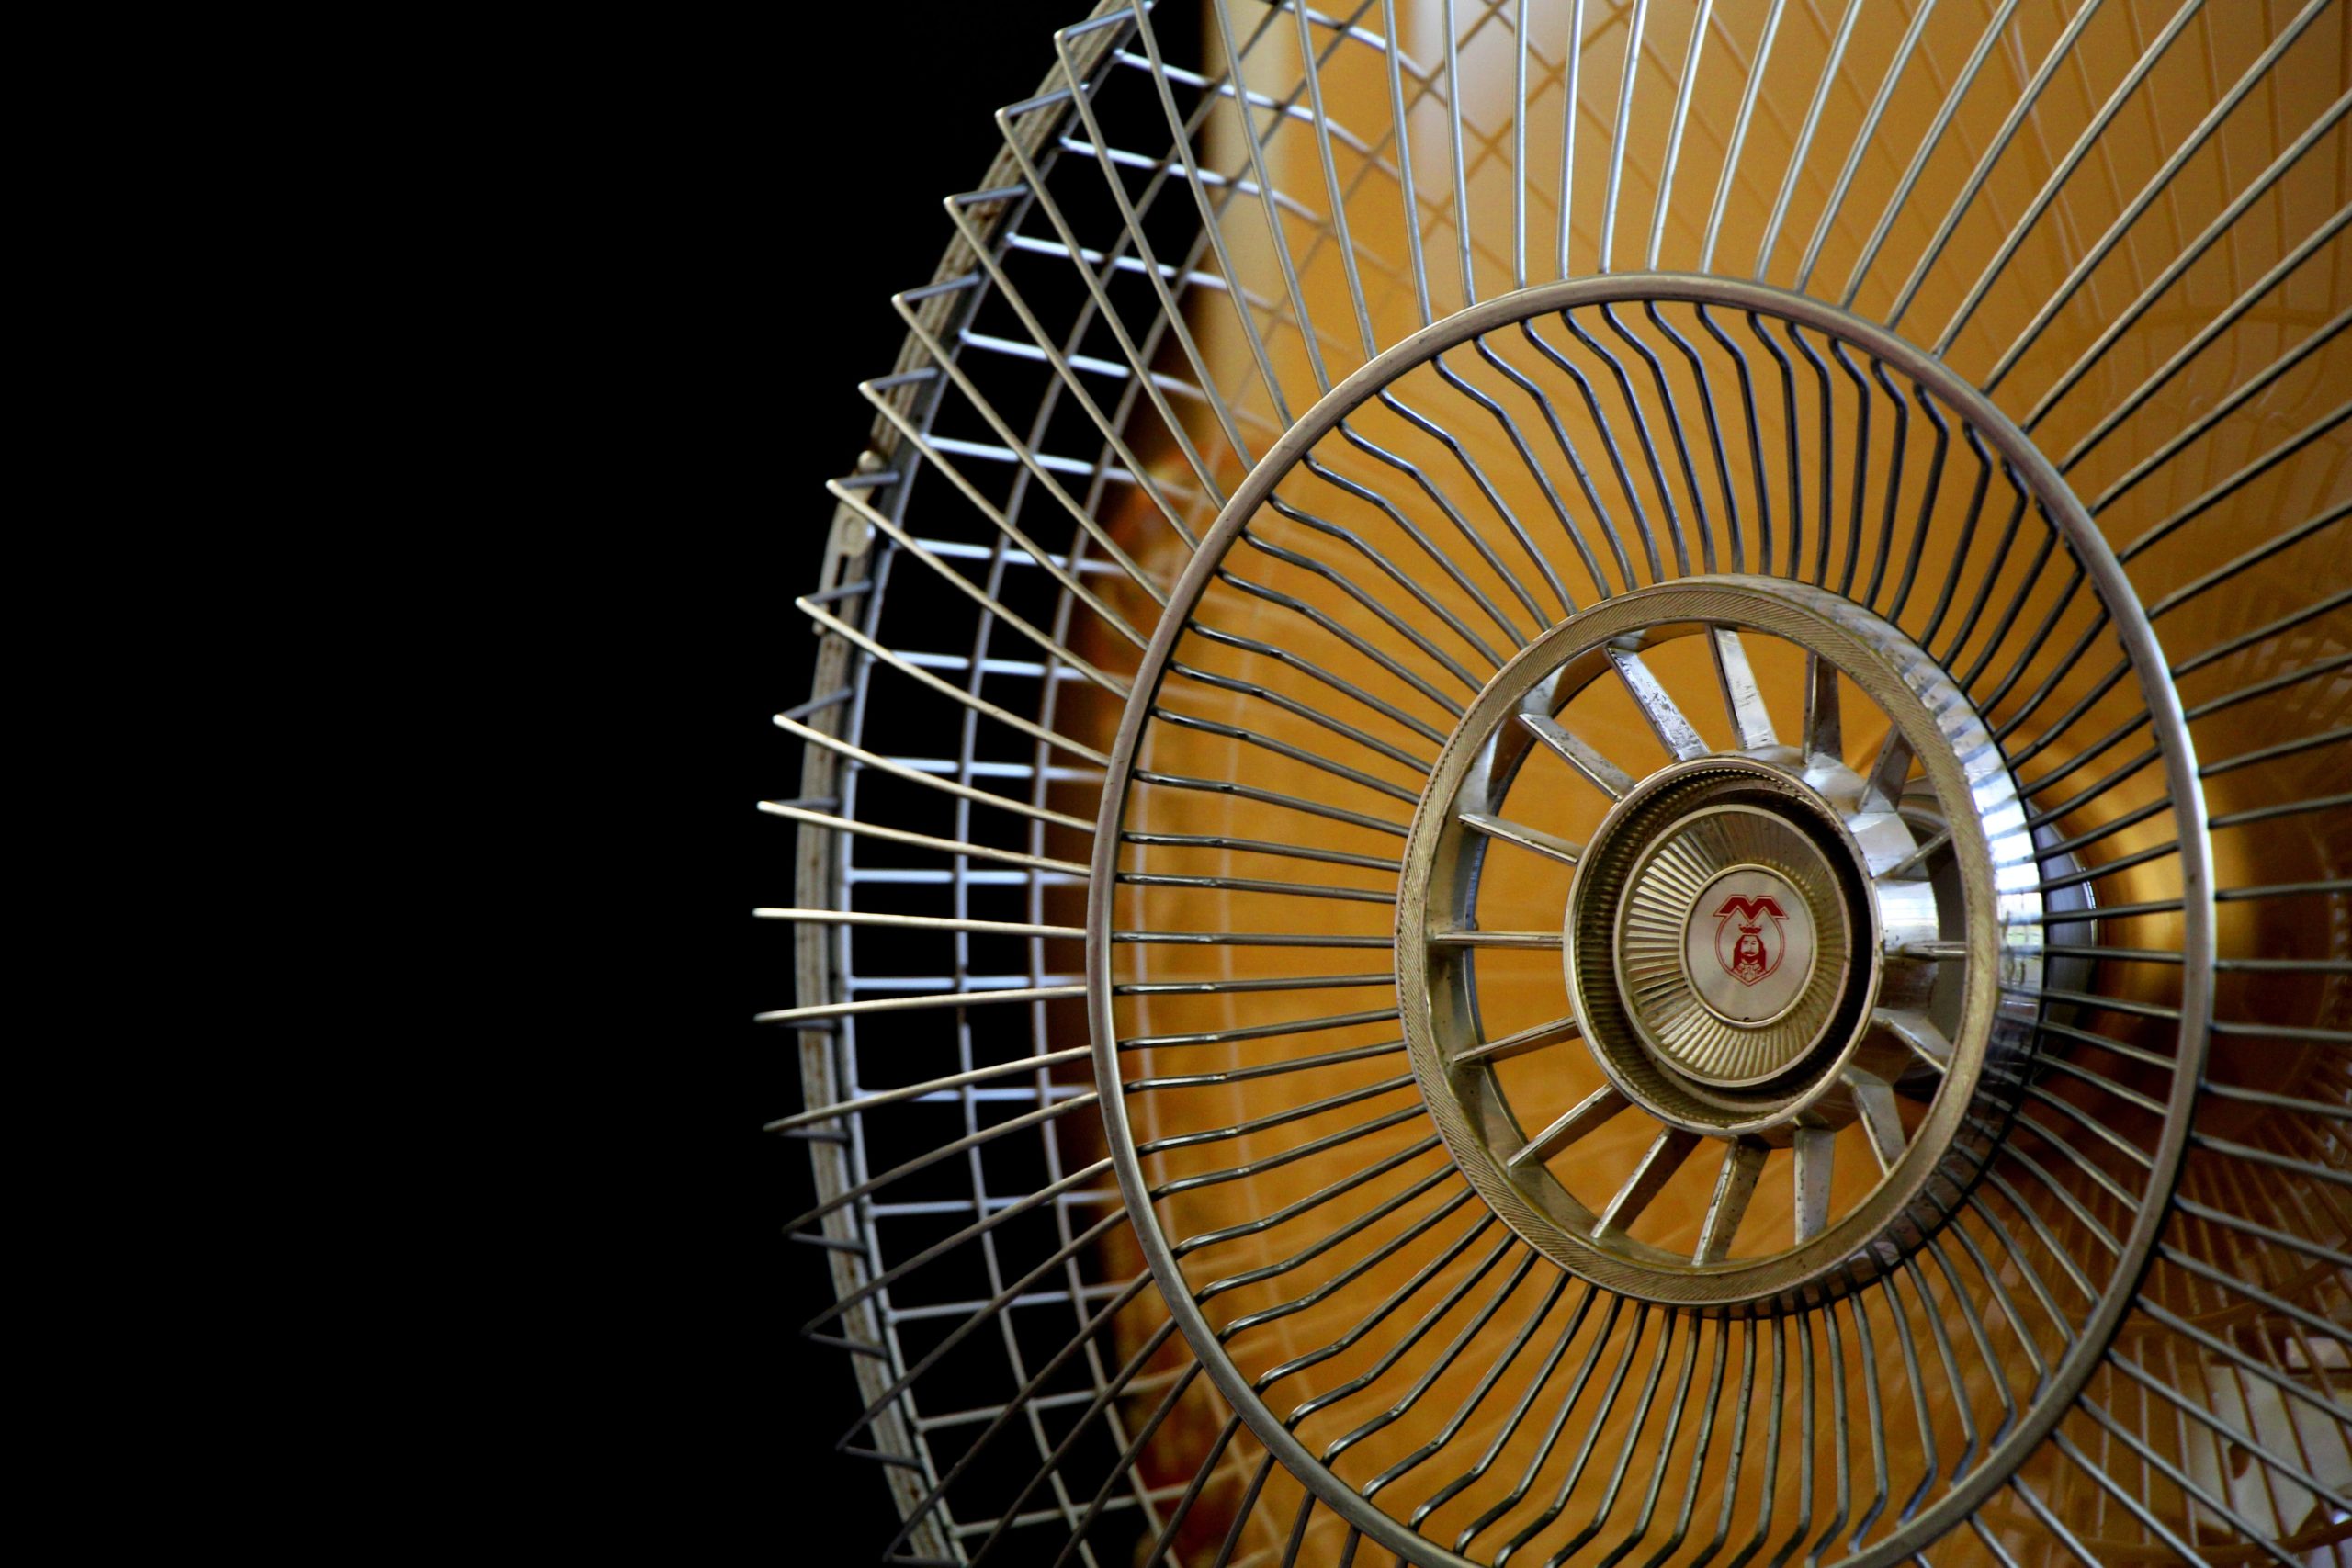 Keep cool without air conditioning-use fans correctly to stay cool without AC